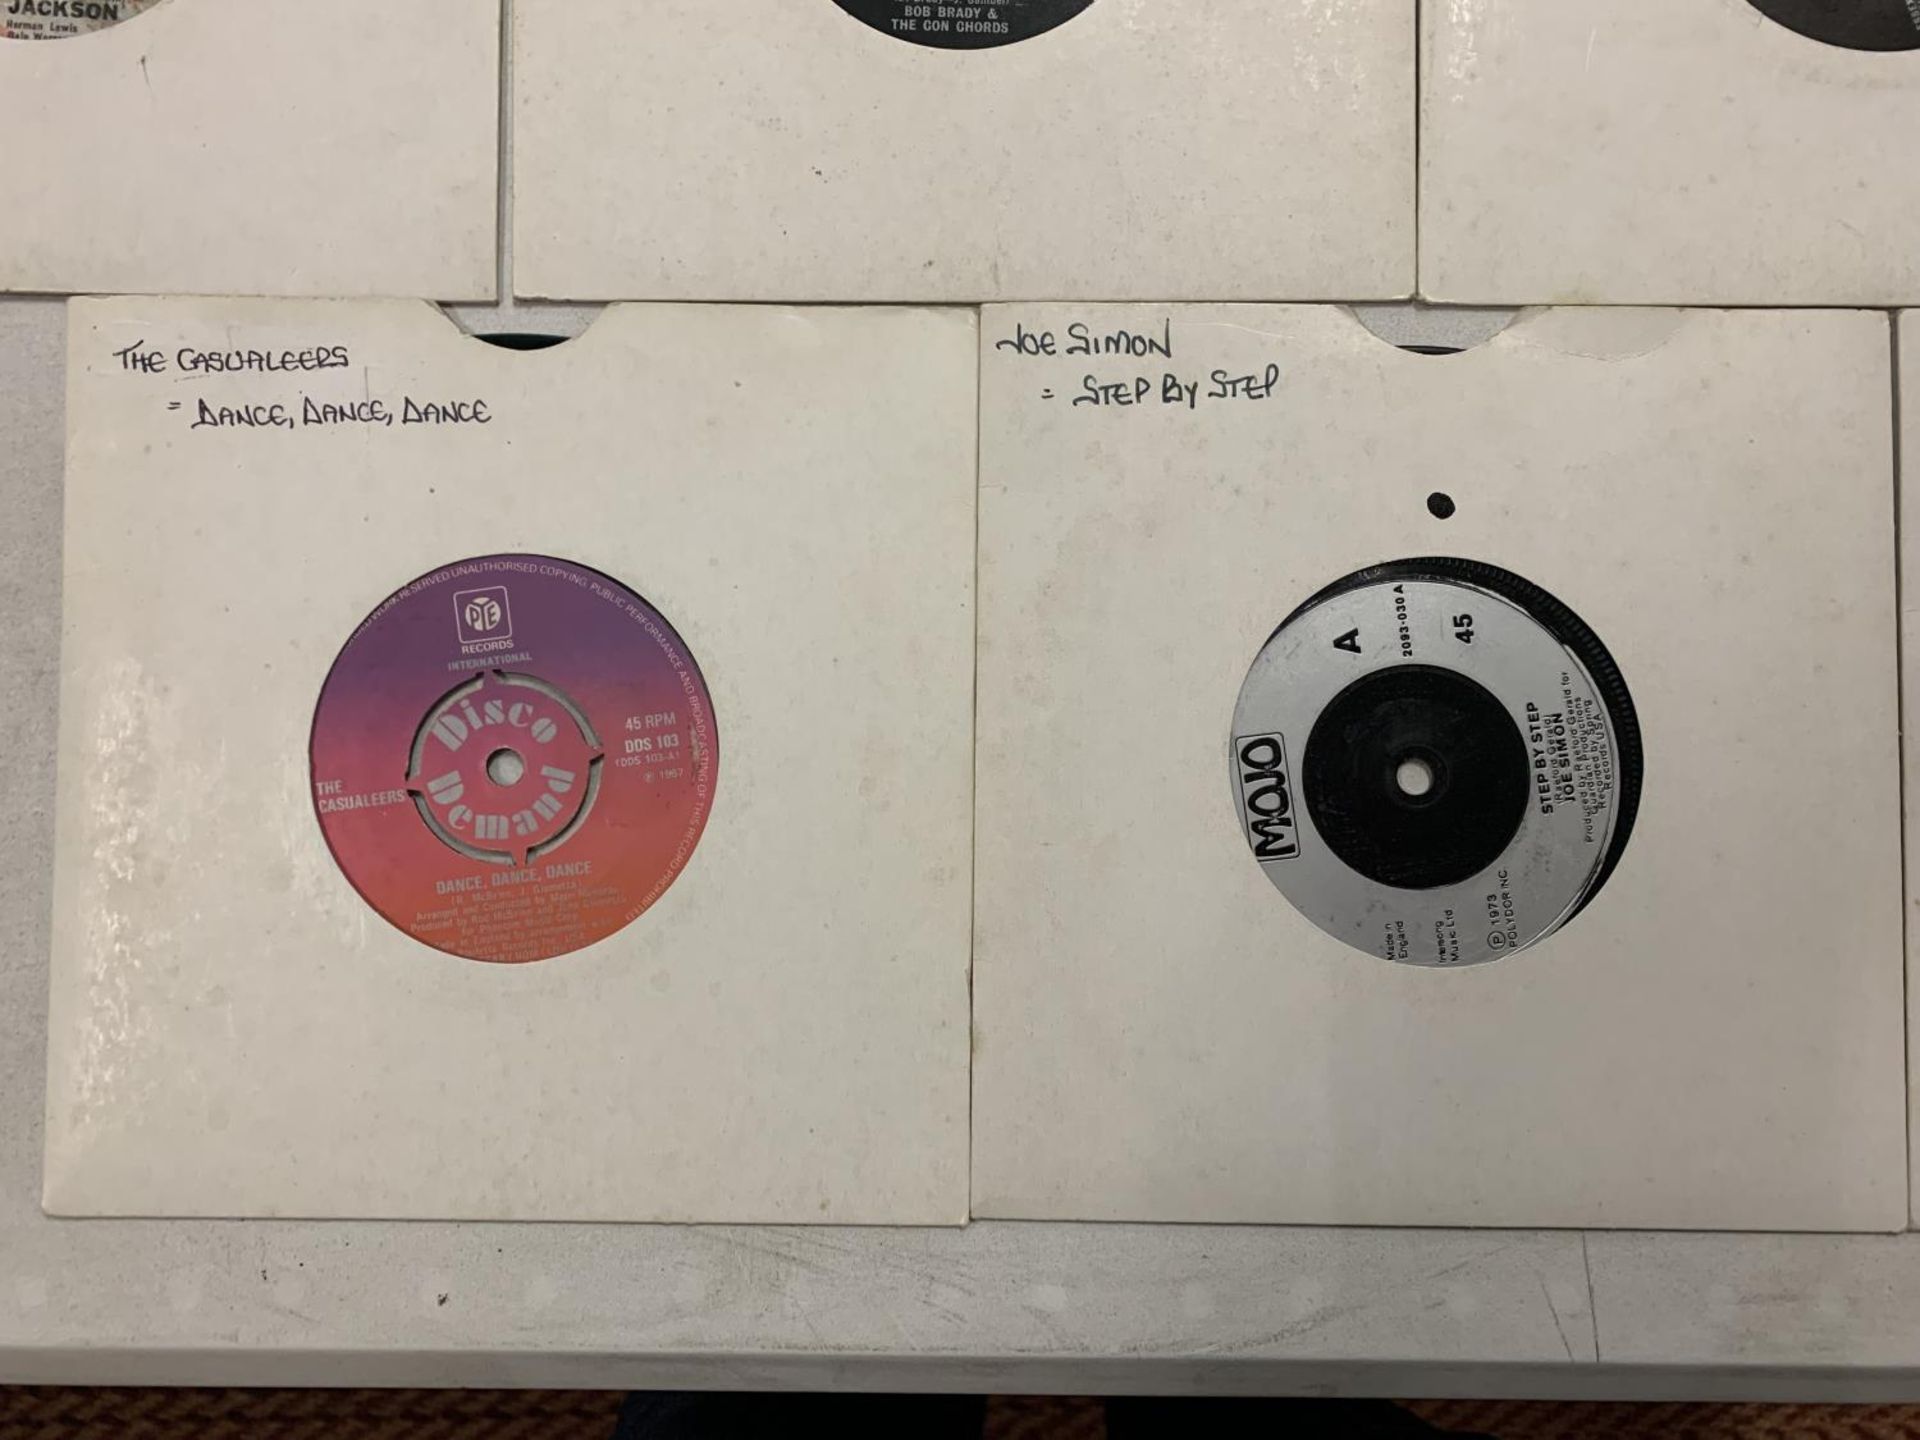 A COLLECTION OF 7 INCH MOSTLY FUNK / SOUL VINYL RECORDS TO INCLUDE: CHUCK JACKSON, EDWIN STARR, - Image 6 of 7